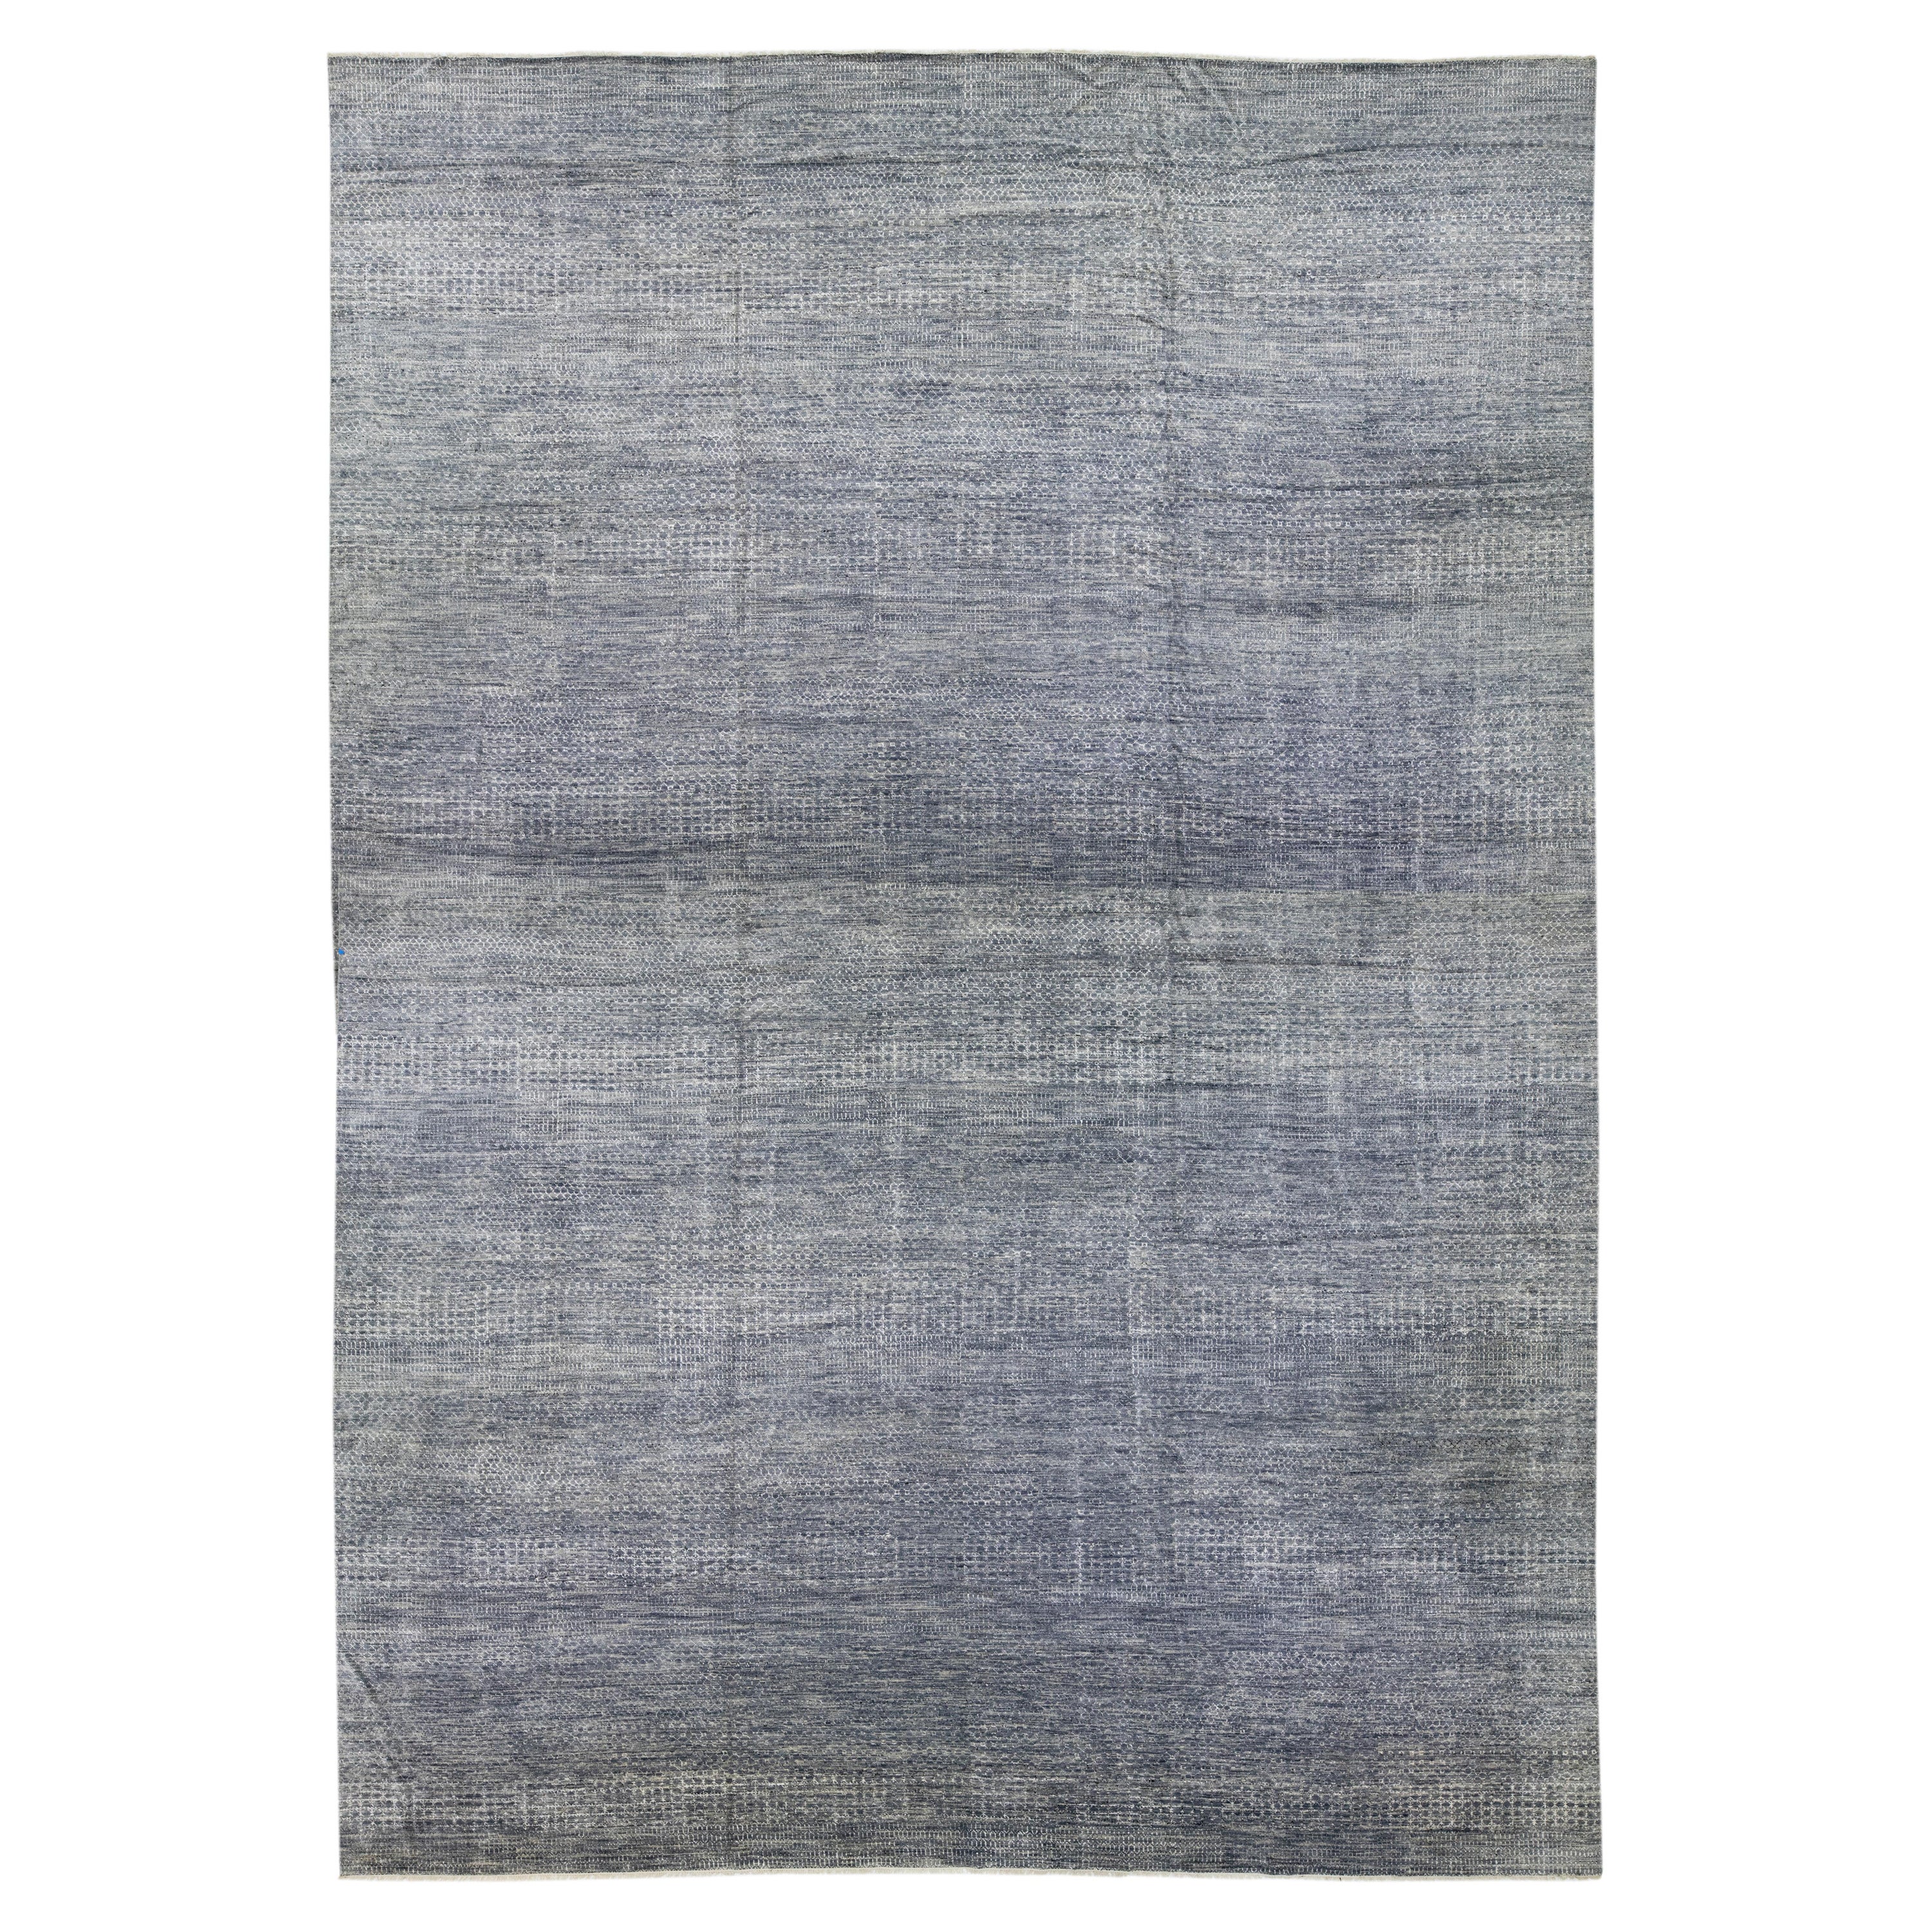 Oversize Modern Indian  Wool Rug Allover Geometric In Gray